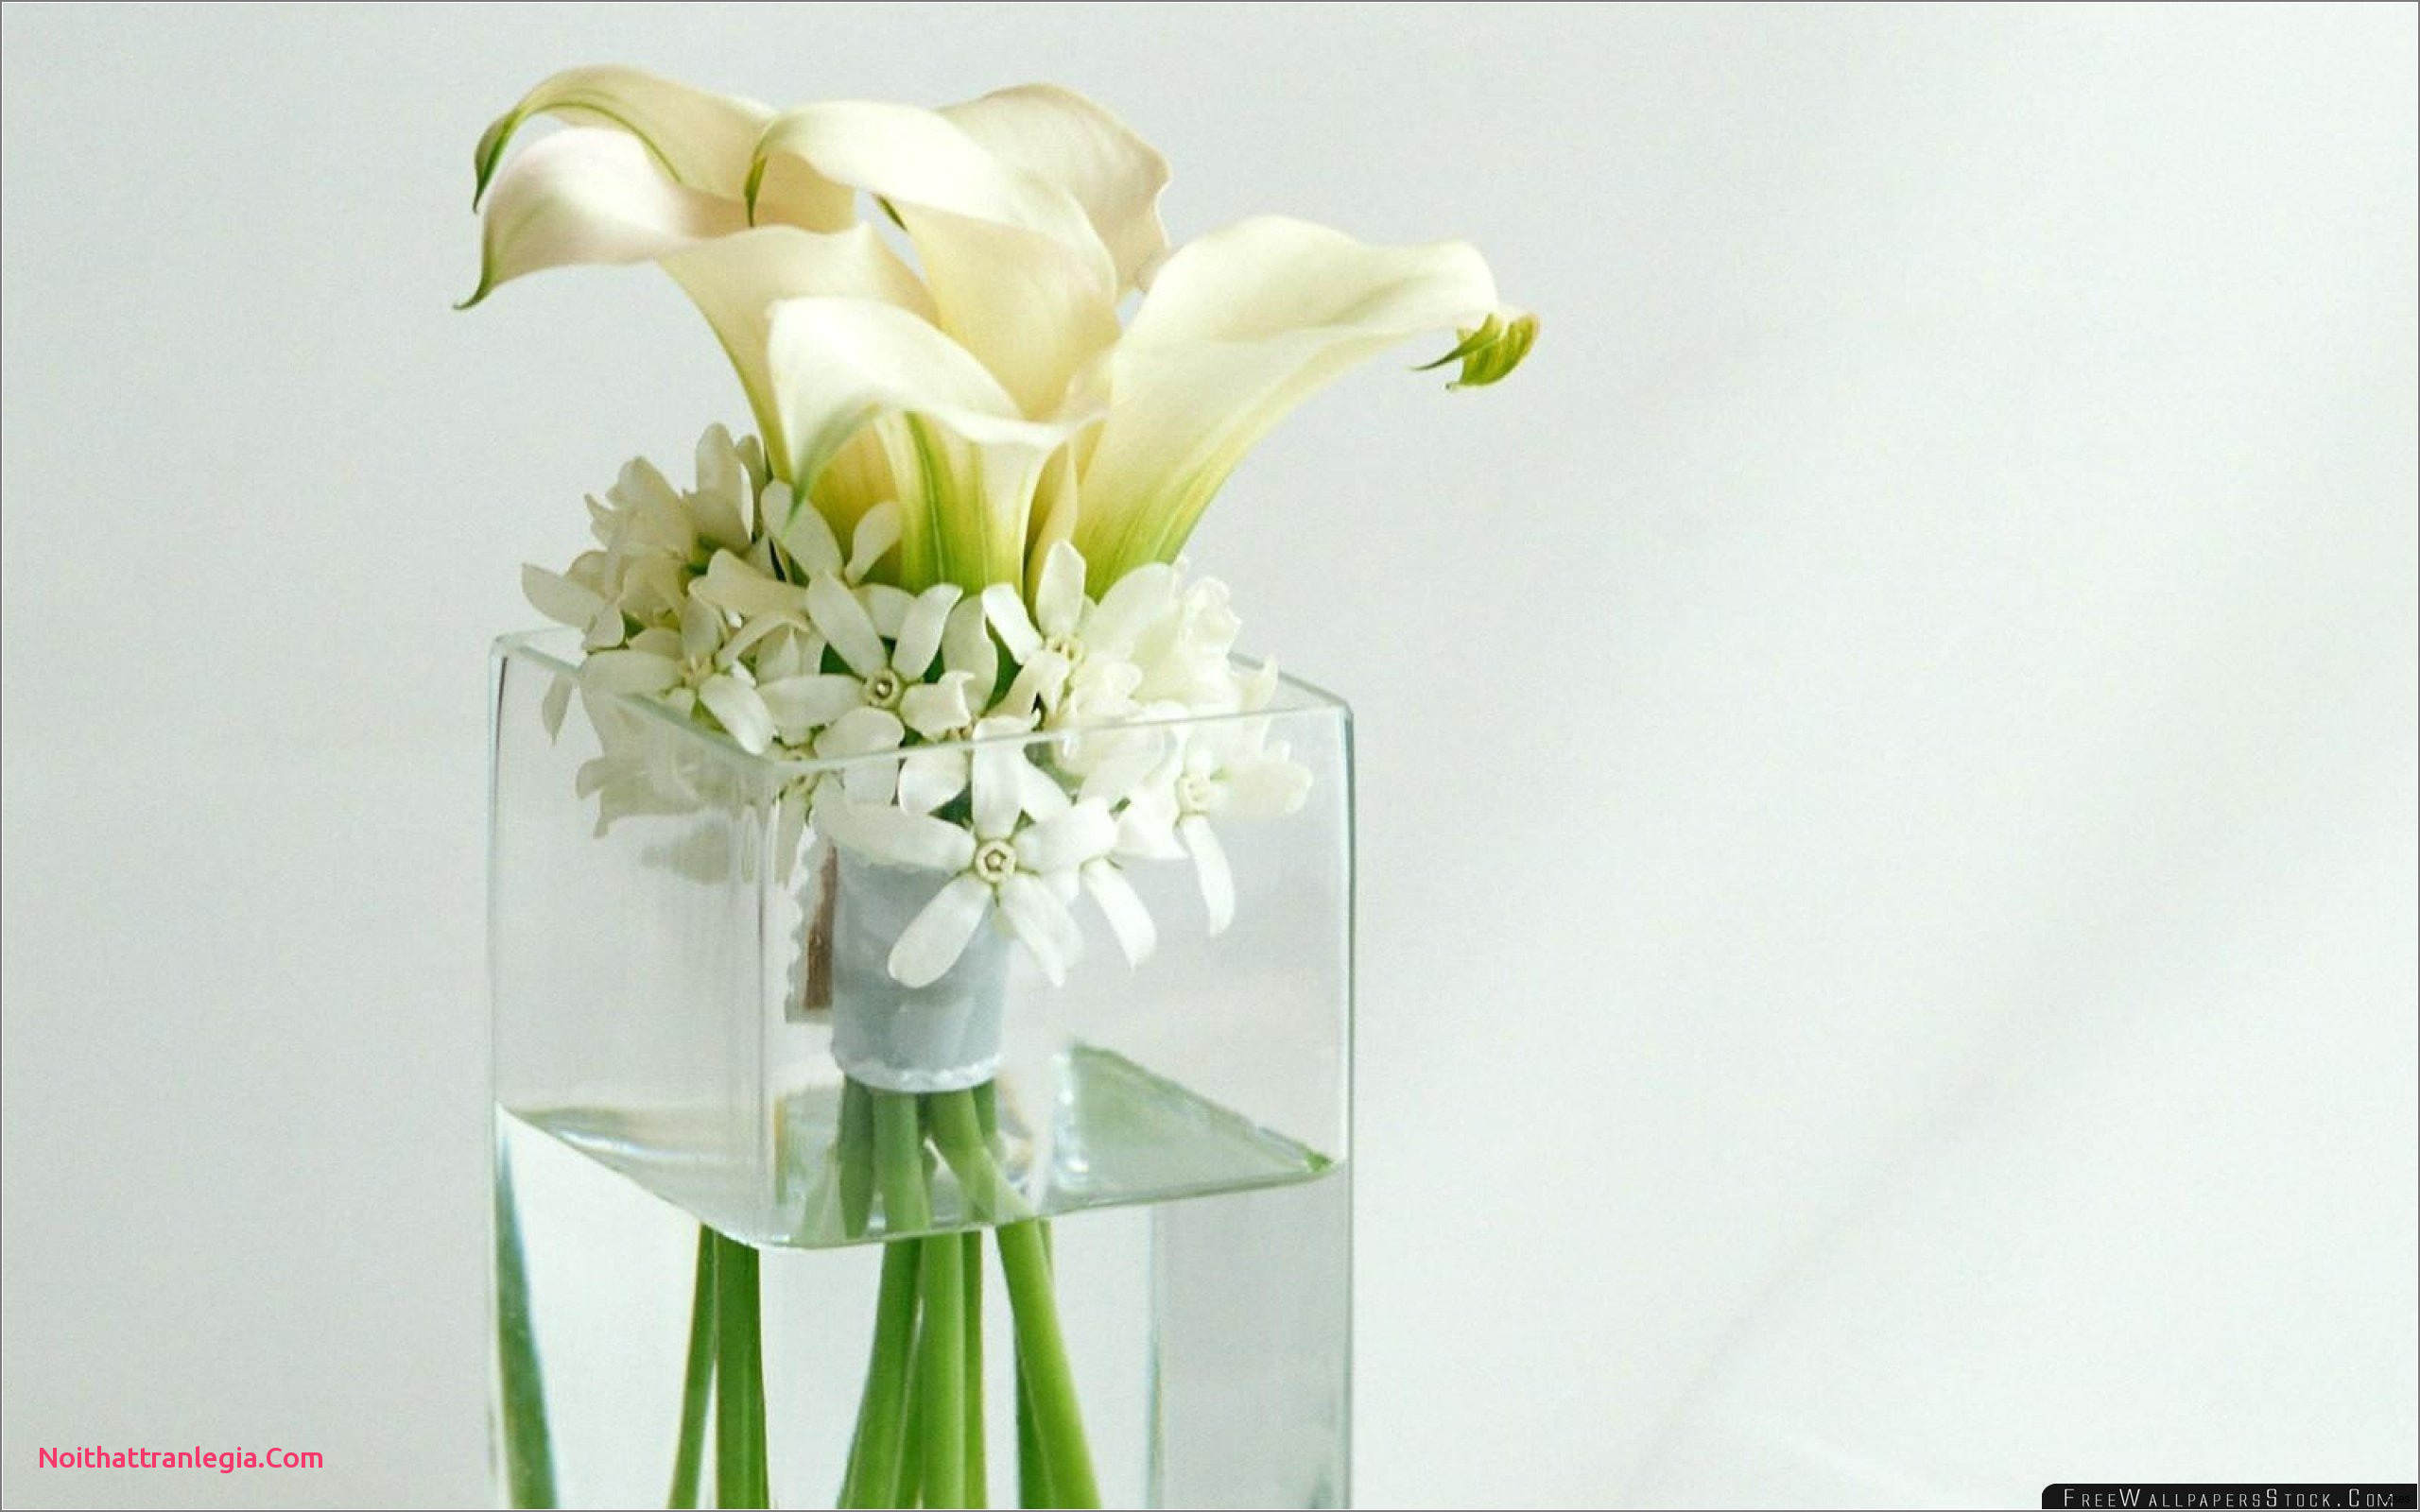 17 Unique Ideas for Glass Vases for Centerpieces 2024 free download ideas for glass vases for centerpieces of 20 wedding vases noithattranlegia vases design with wedding petals amazing tall vase centerpiece ideas vases flowers in water 0d artificial 2560 87